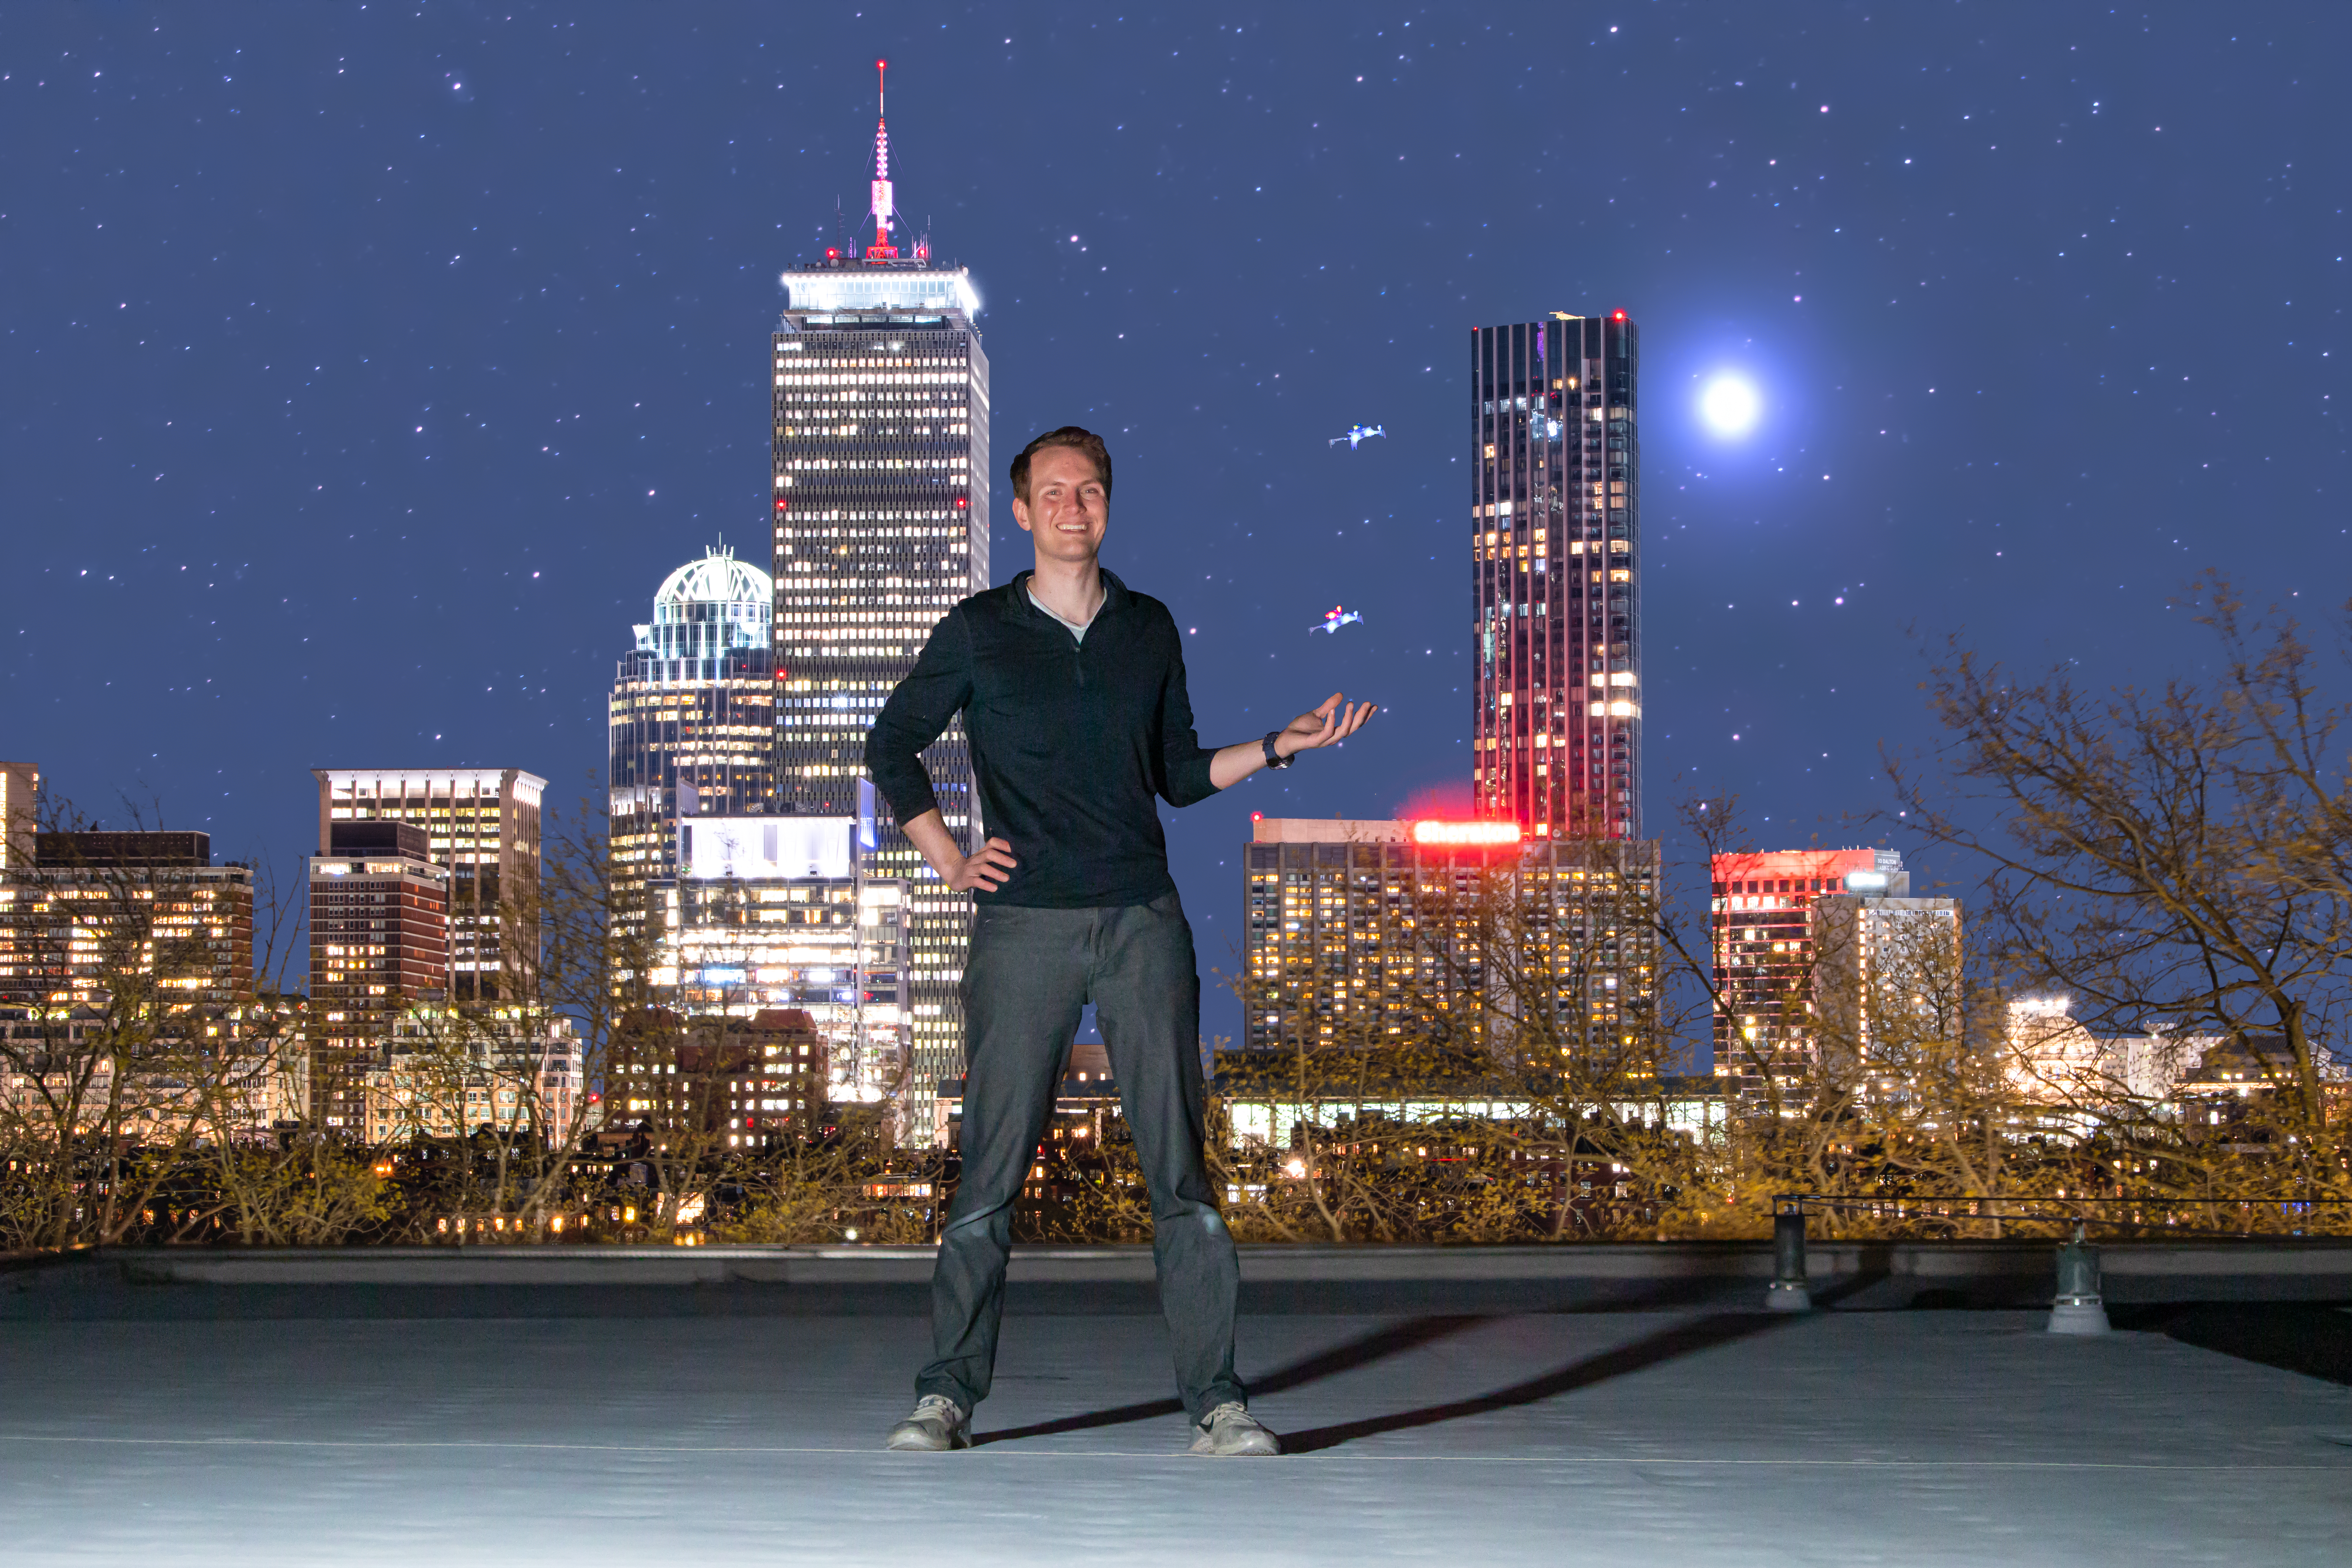 Charles Dawson stands on a roof in the center of the frame. His left hand is extended, and two palm-sized drones fly above it. In the background, stars can be seen in the night sky, and the Boston skyline with the Prudential Center is lit up.